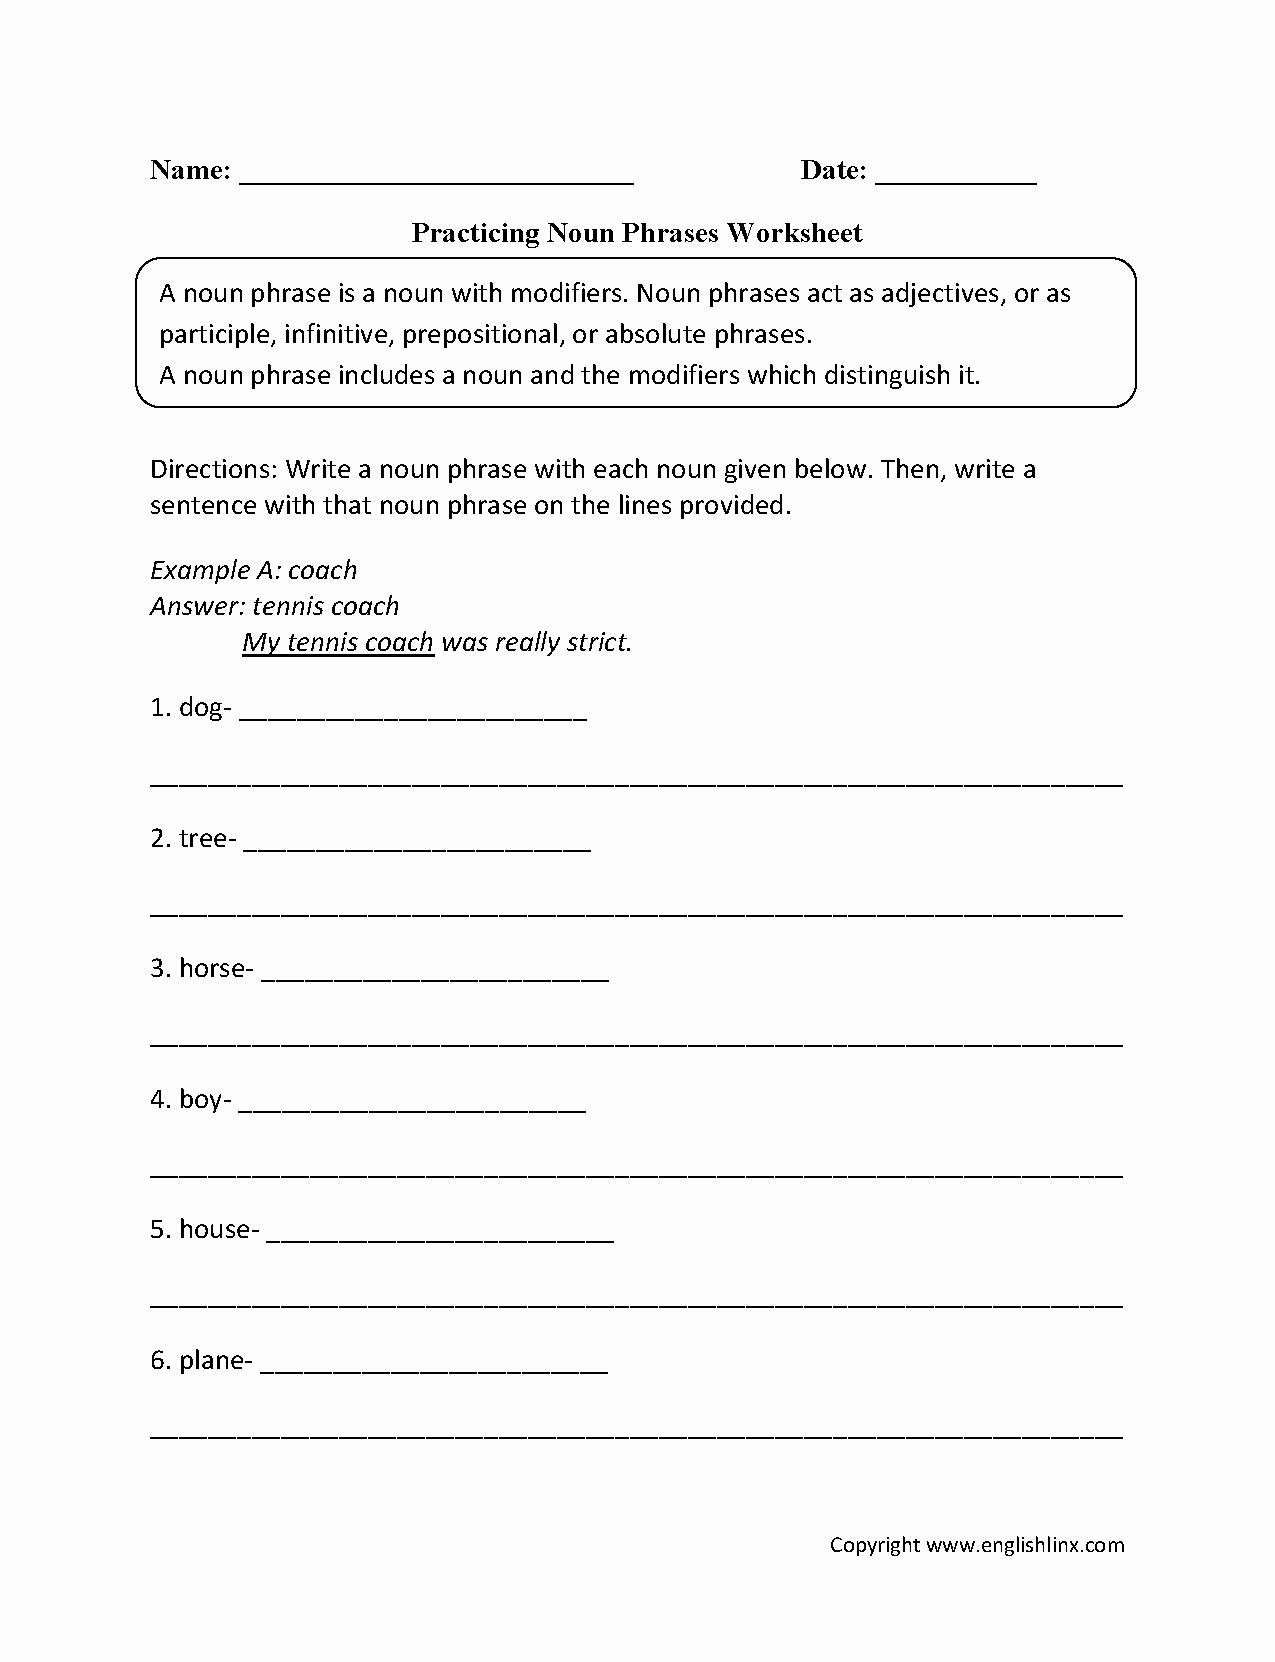 Prepositional Phrase Worksheet with Answers Luxury Prepositional Phrases Used as Adjectives and Adverbs